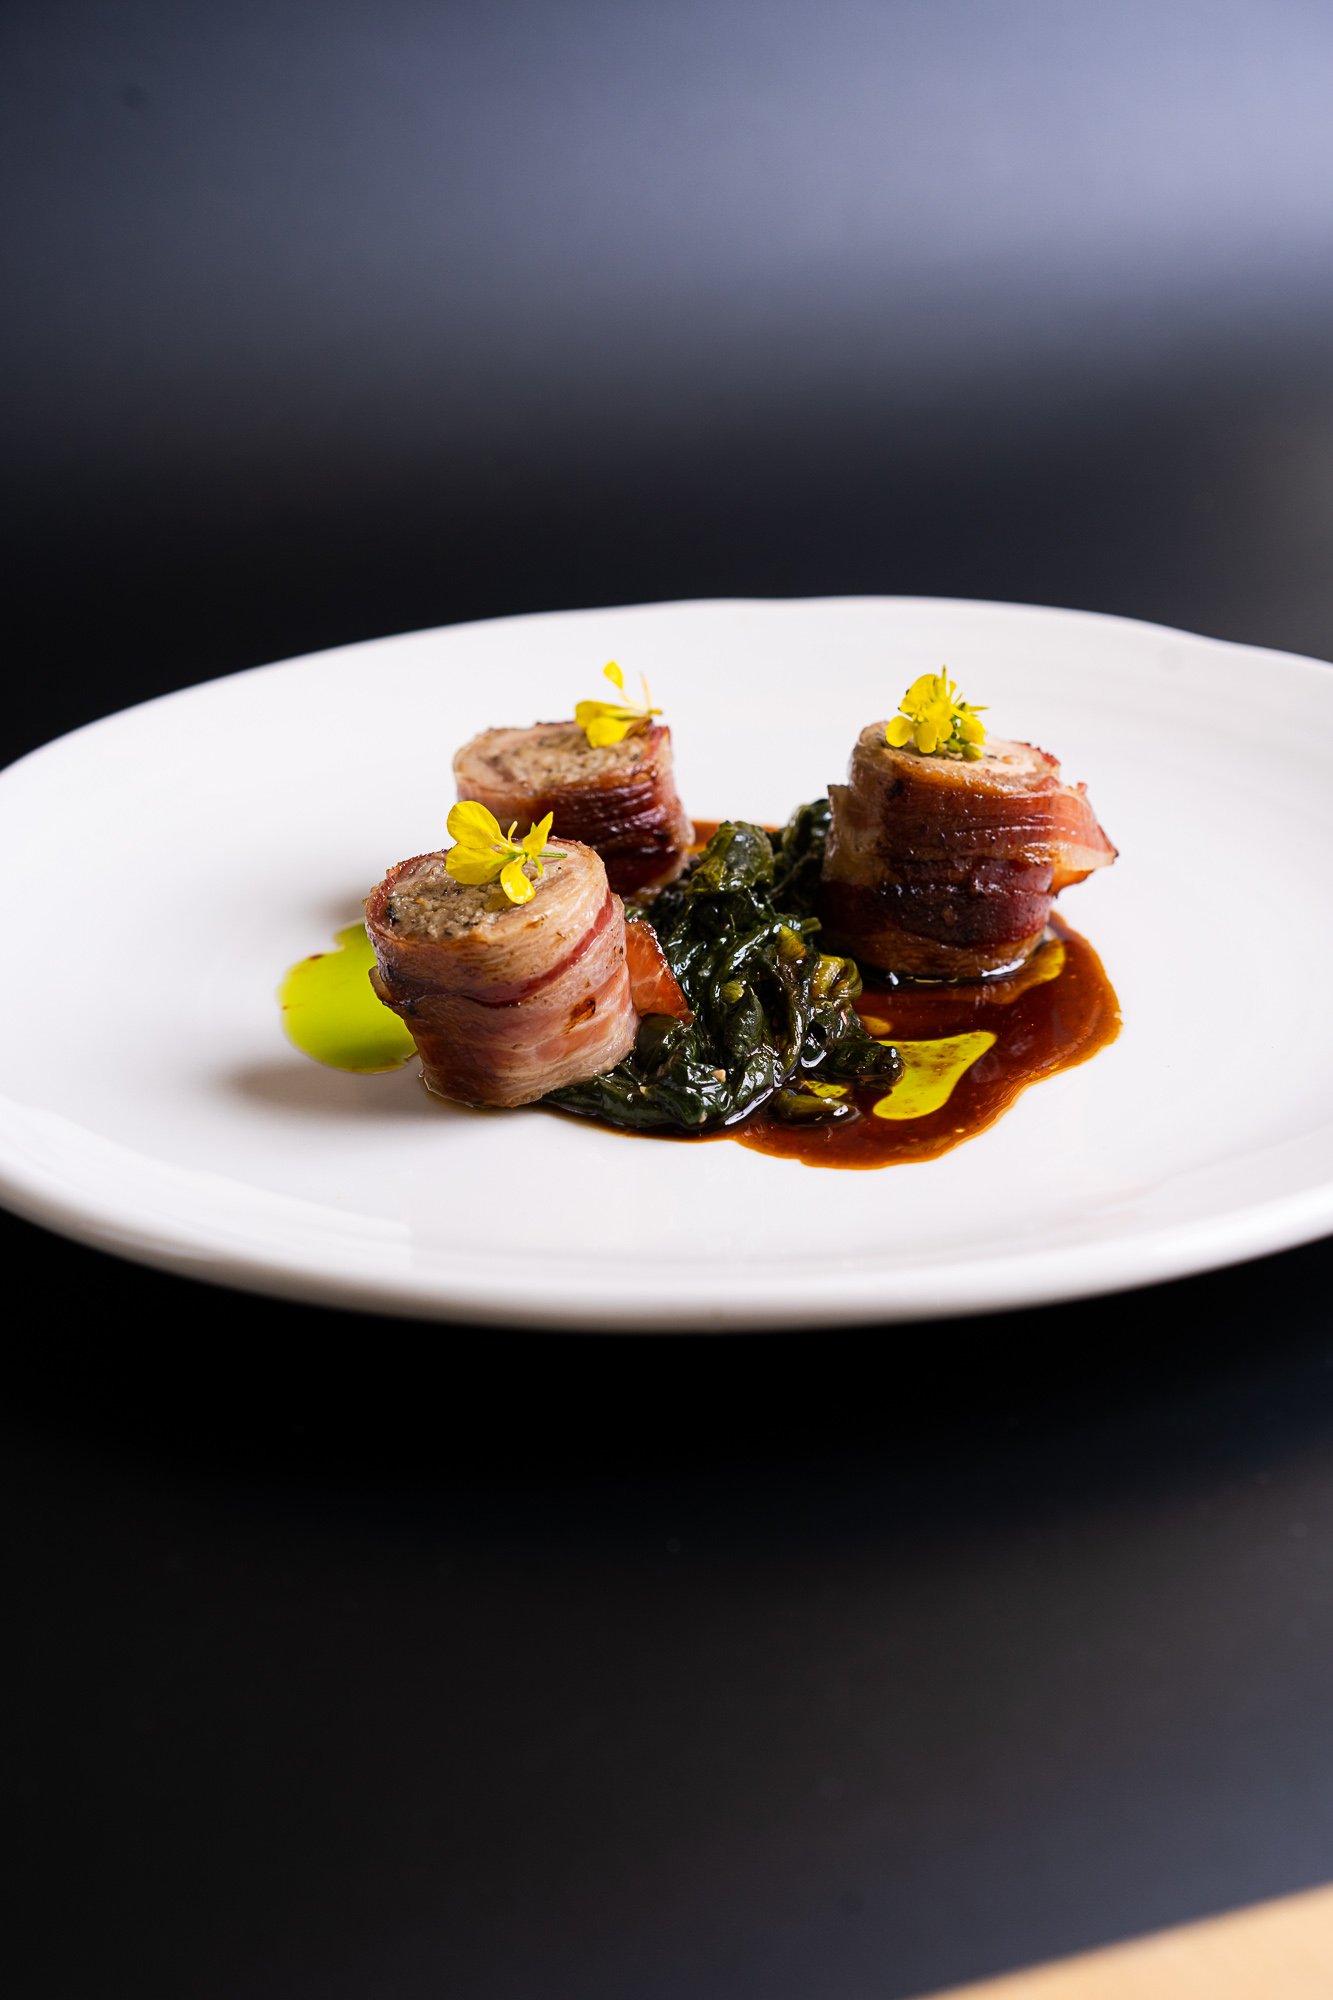 Stuffed quail with braised spinach pine nuts, raisins and jus.jpg